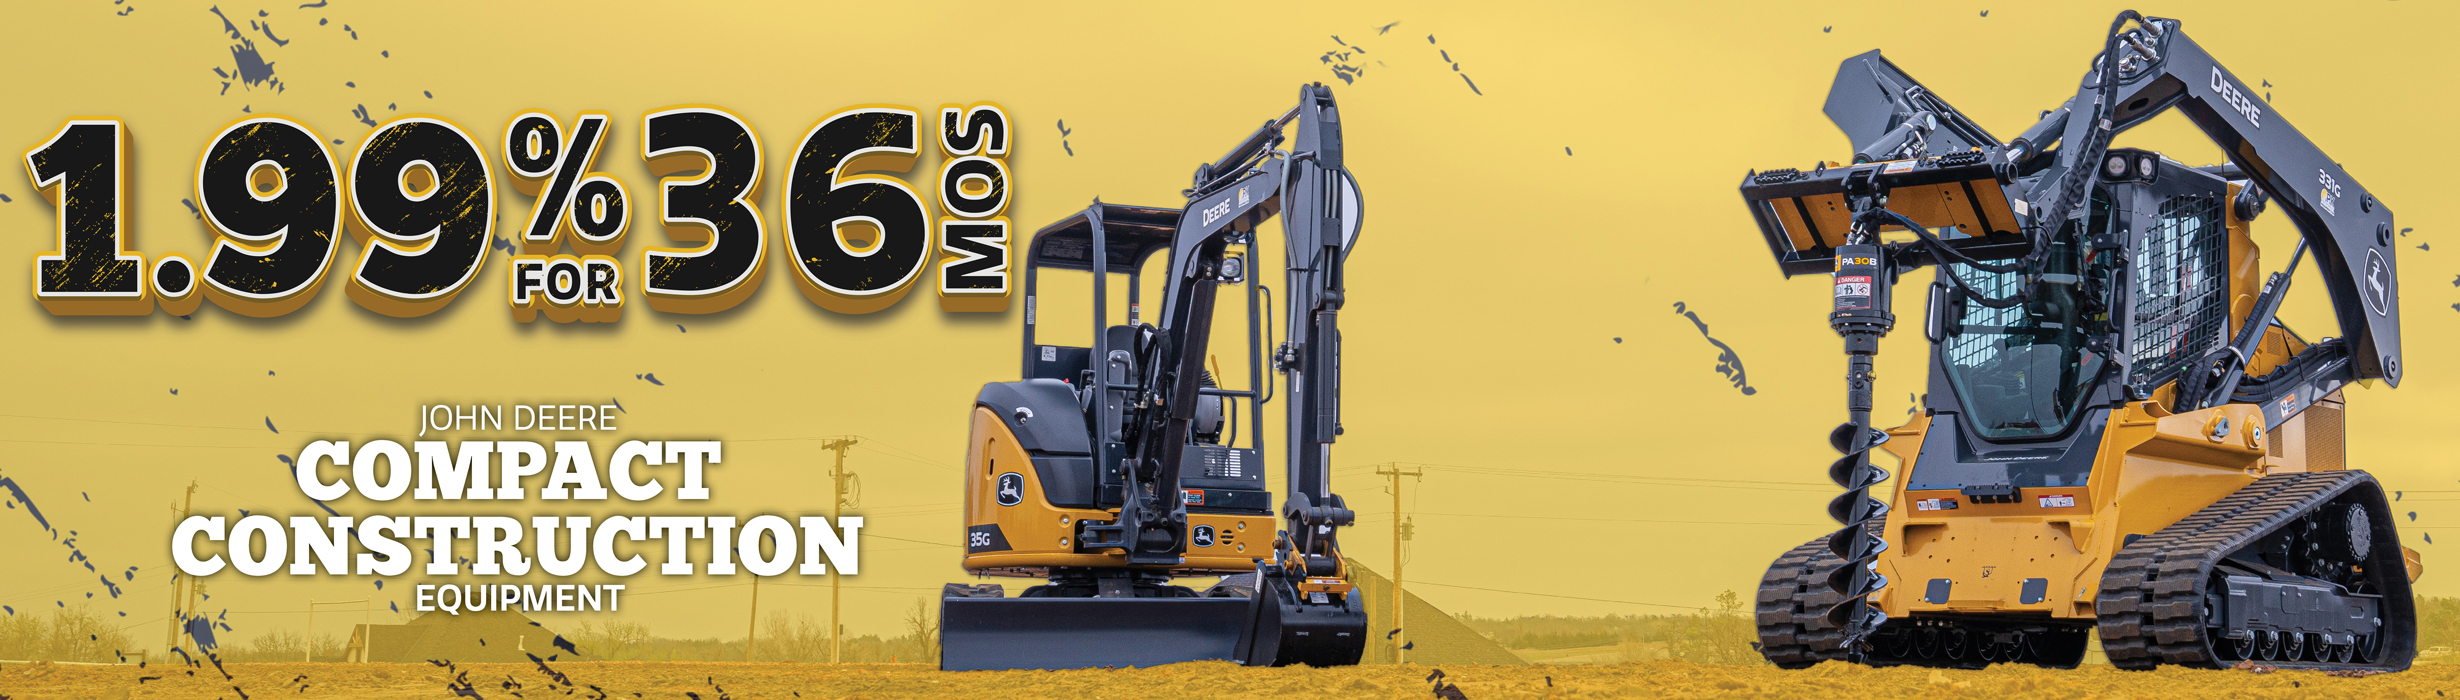 Get 1.99% for 36 mos in Compact Construction Equipment!